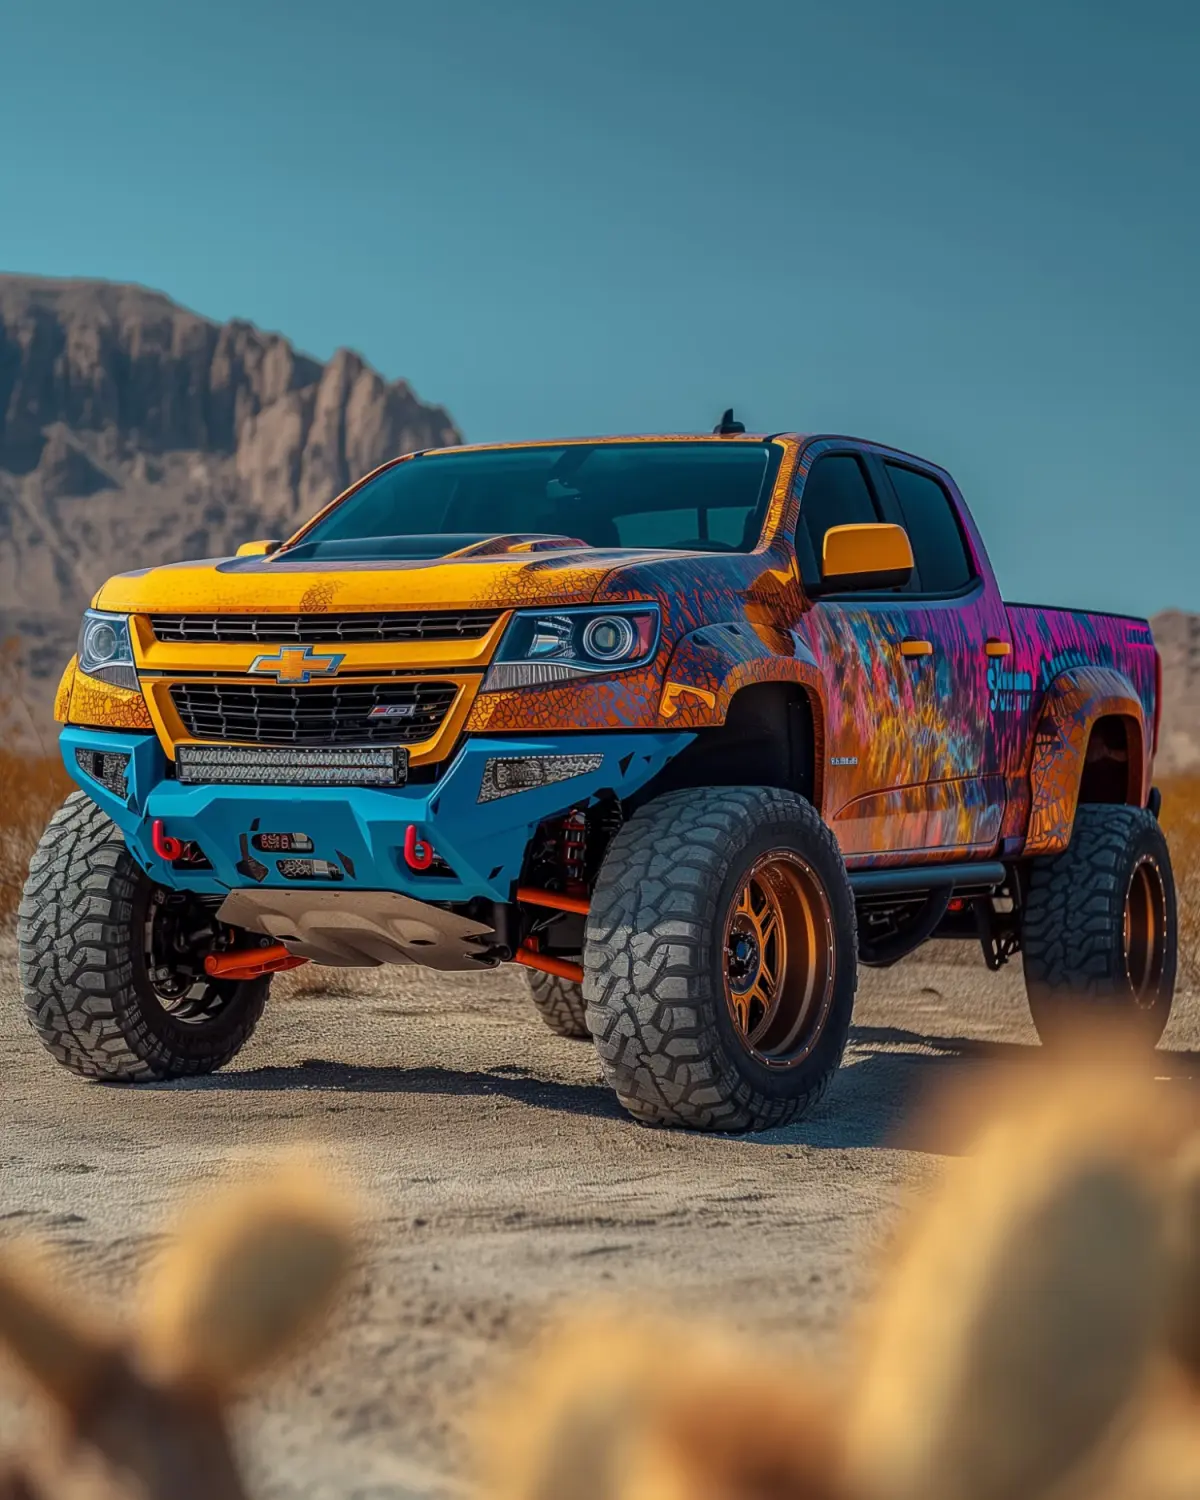 Lifted Chevrolet Colorado with striking bold graphics in an off-road environment